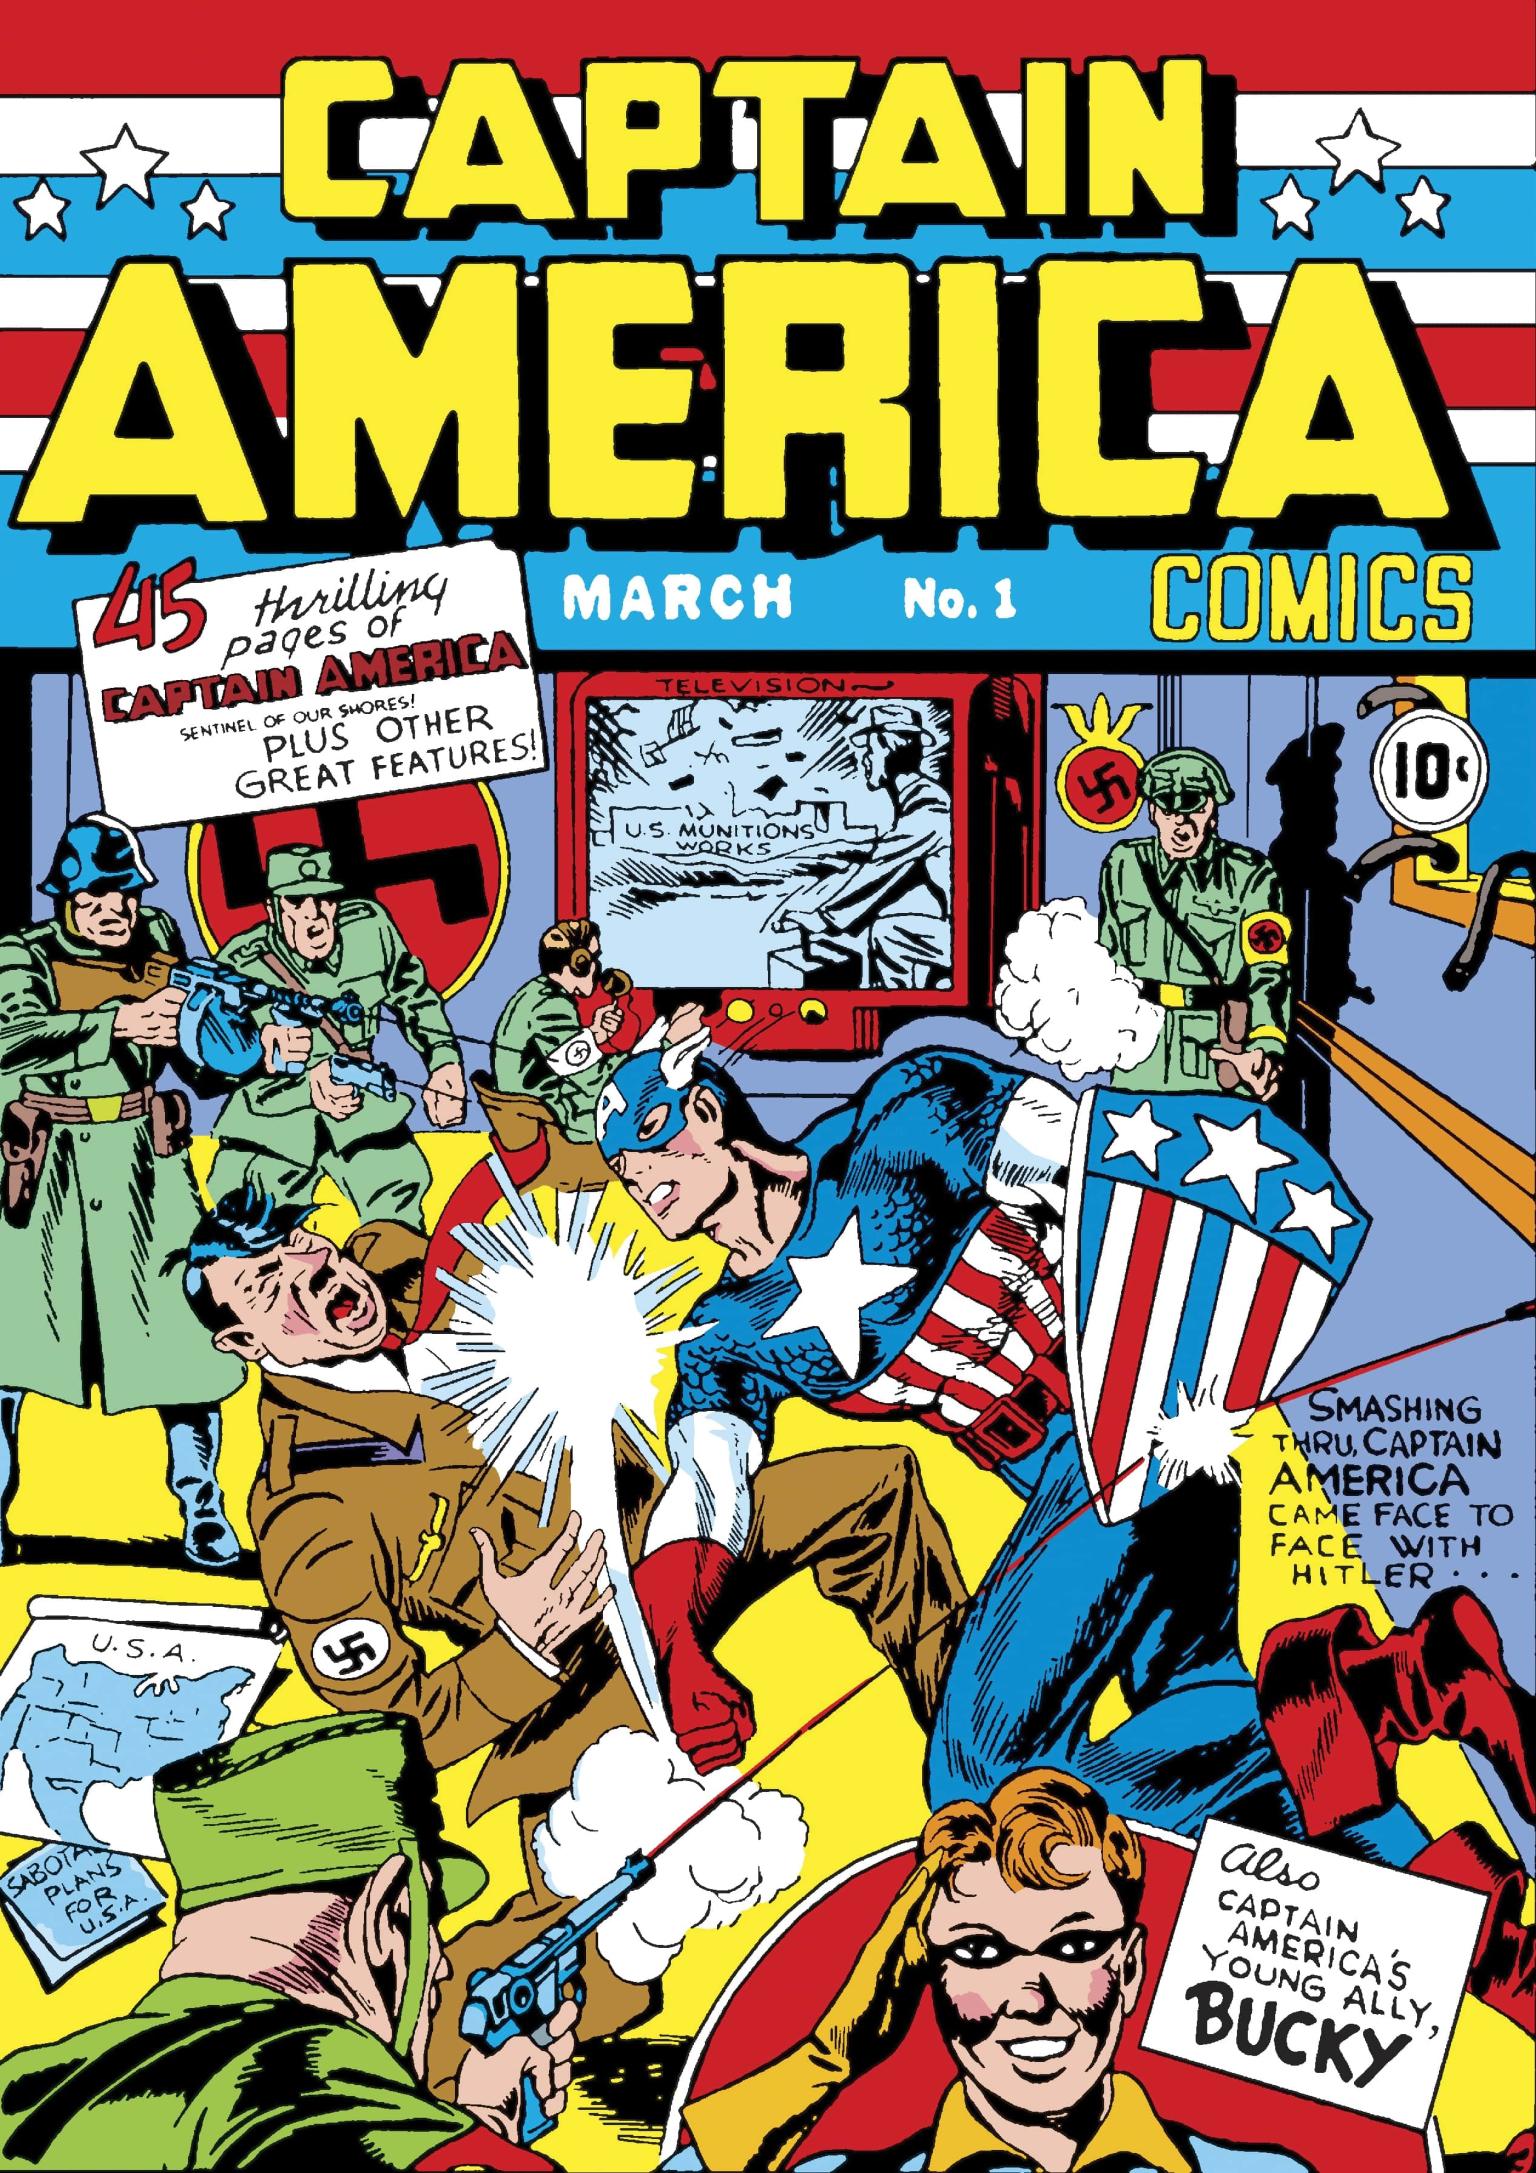 Comic cover featuring superhero in American patriotic outfit punching Hitler in the face, surrounded by papers depicting invasions, a TV screen, and fascist soldiers with weapons; heading in English across the top. 